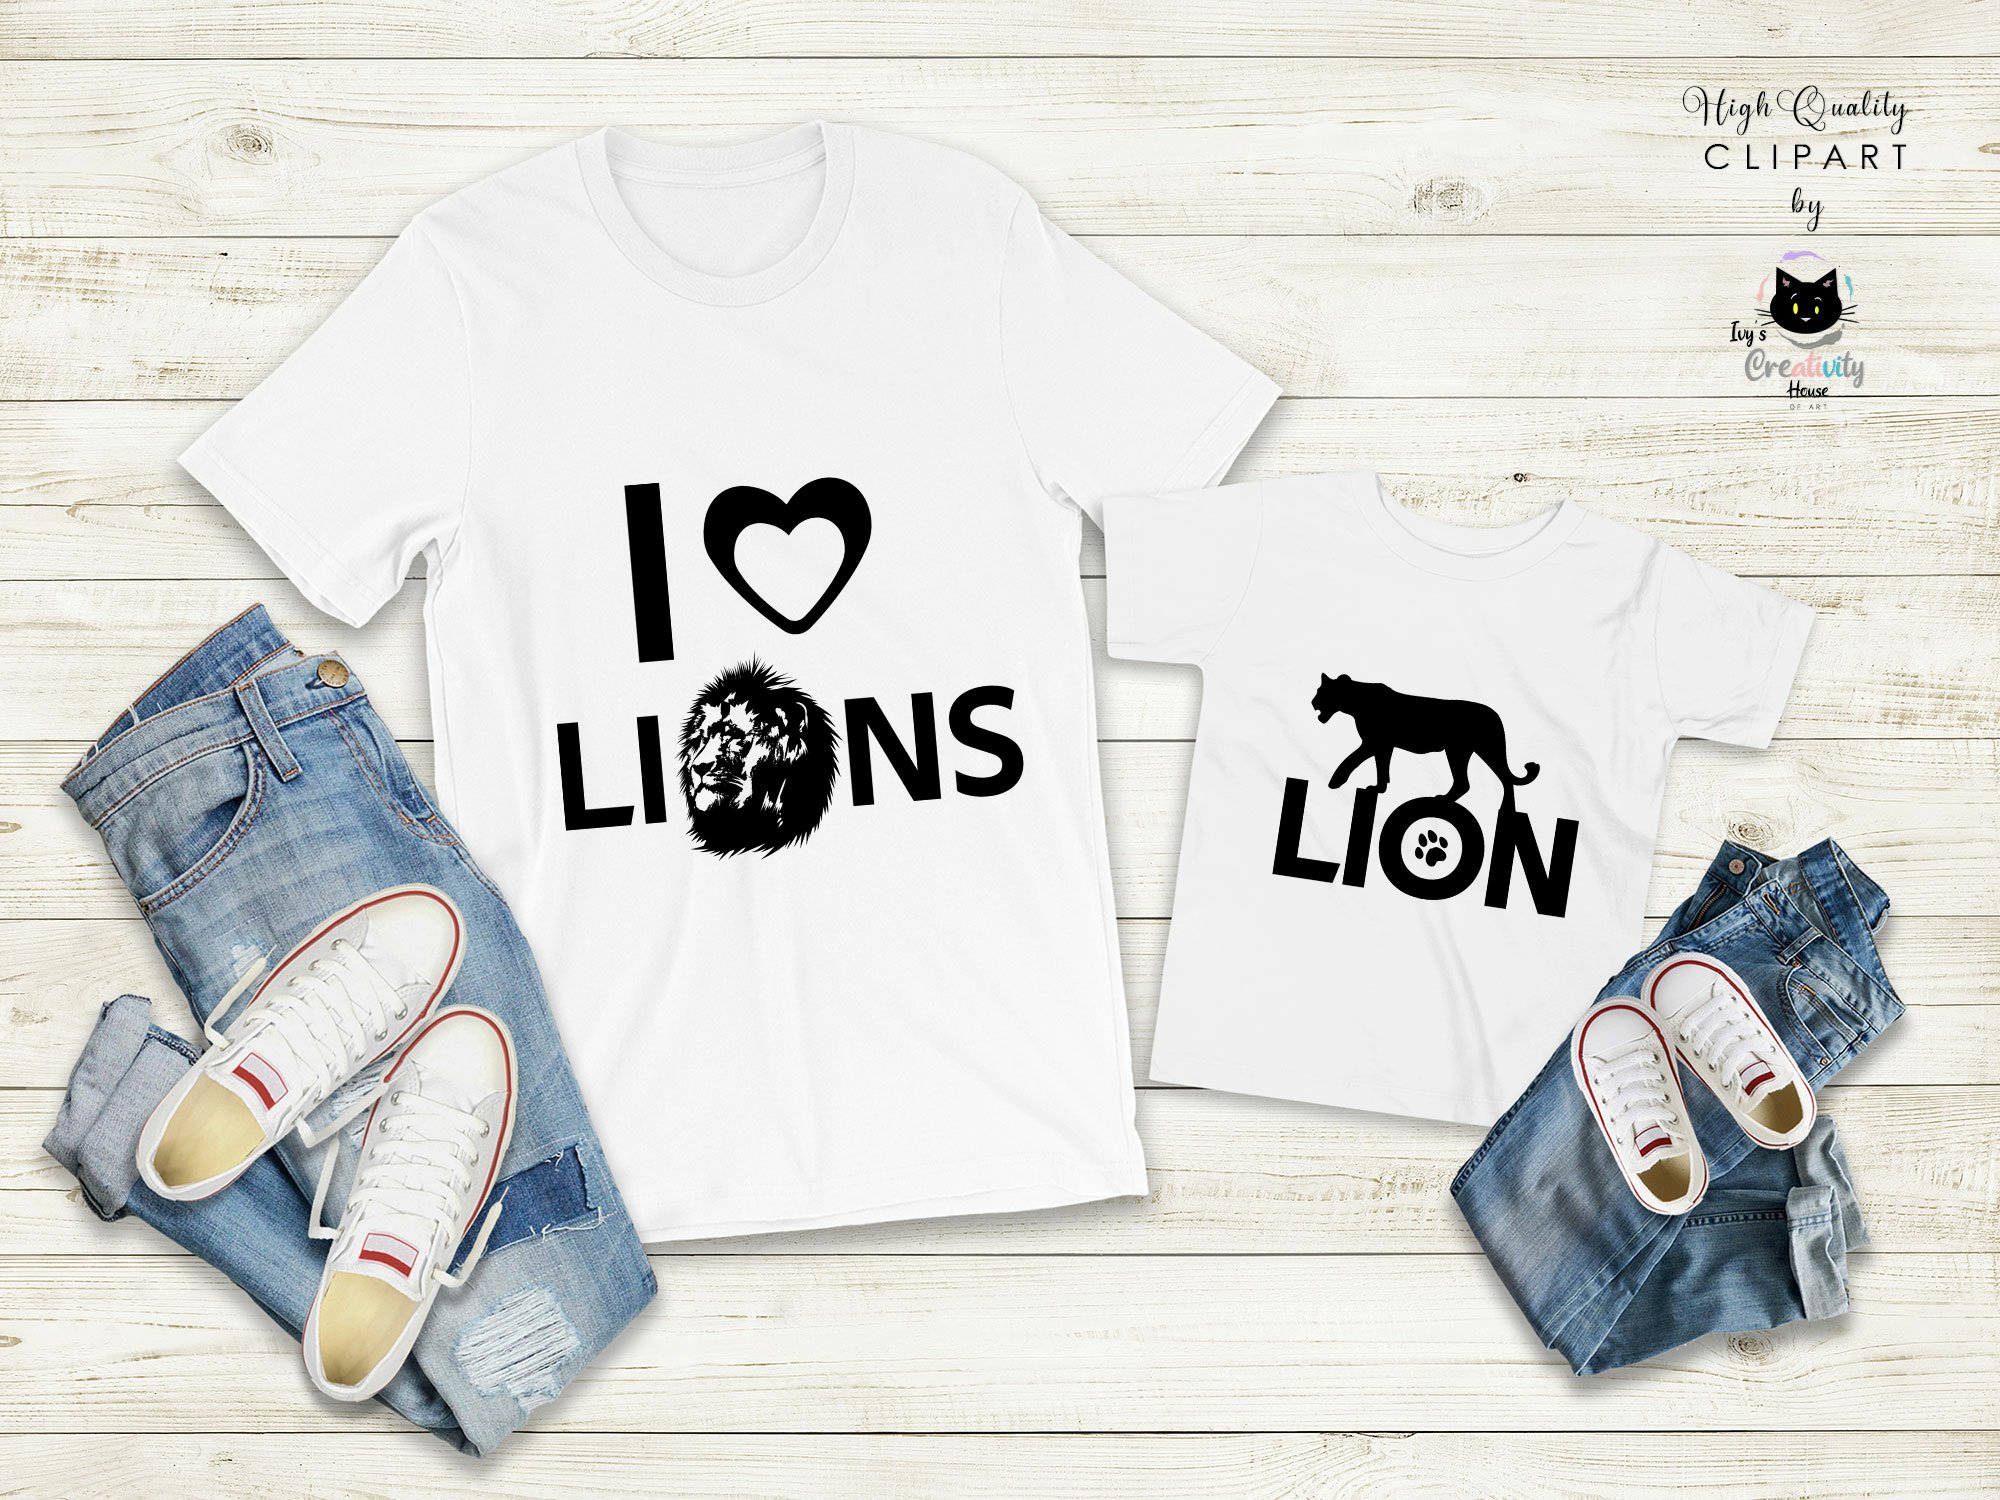 White t-shirt with black lions.